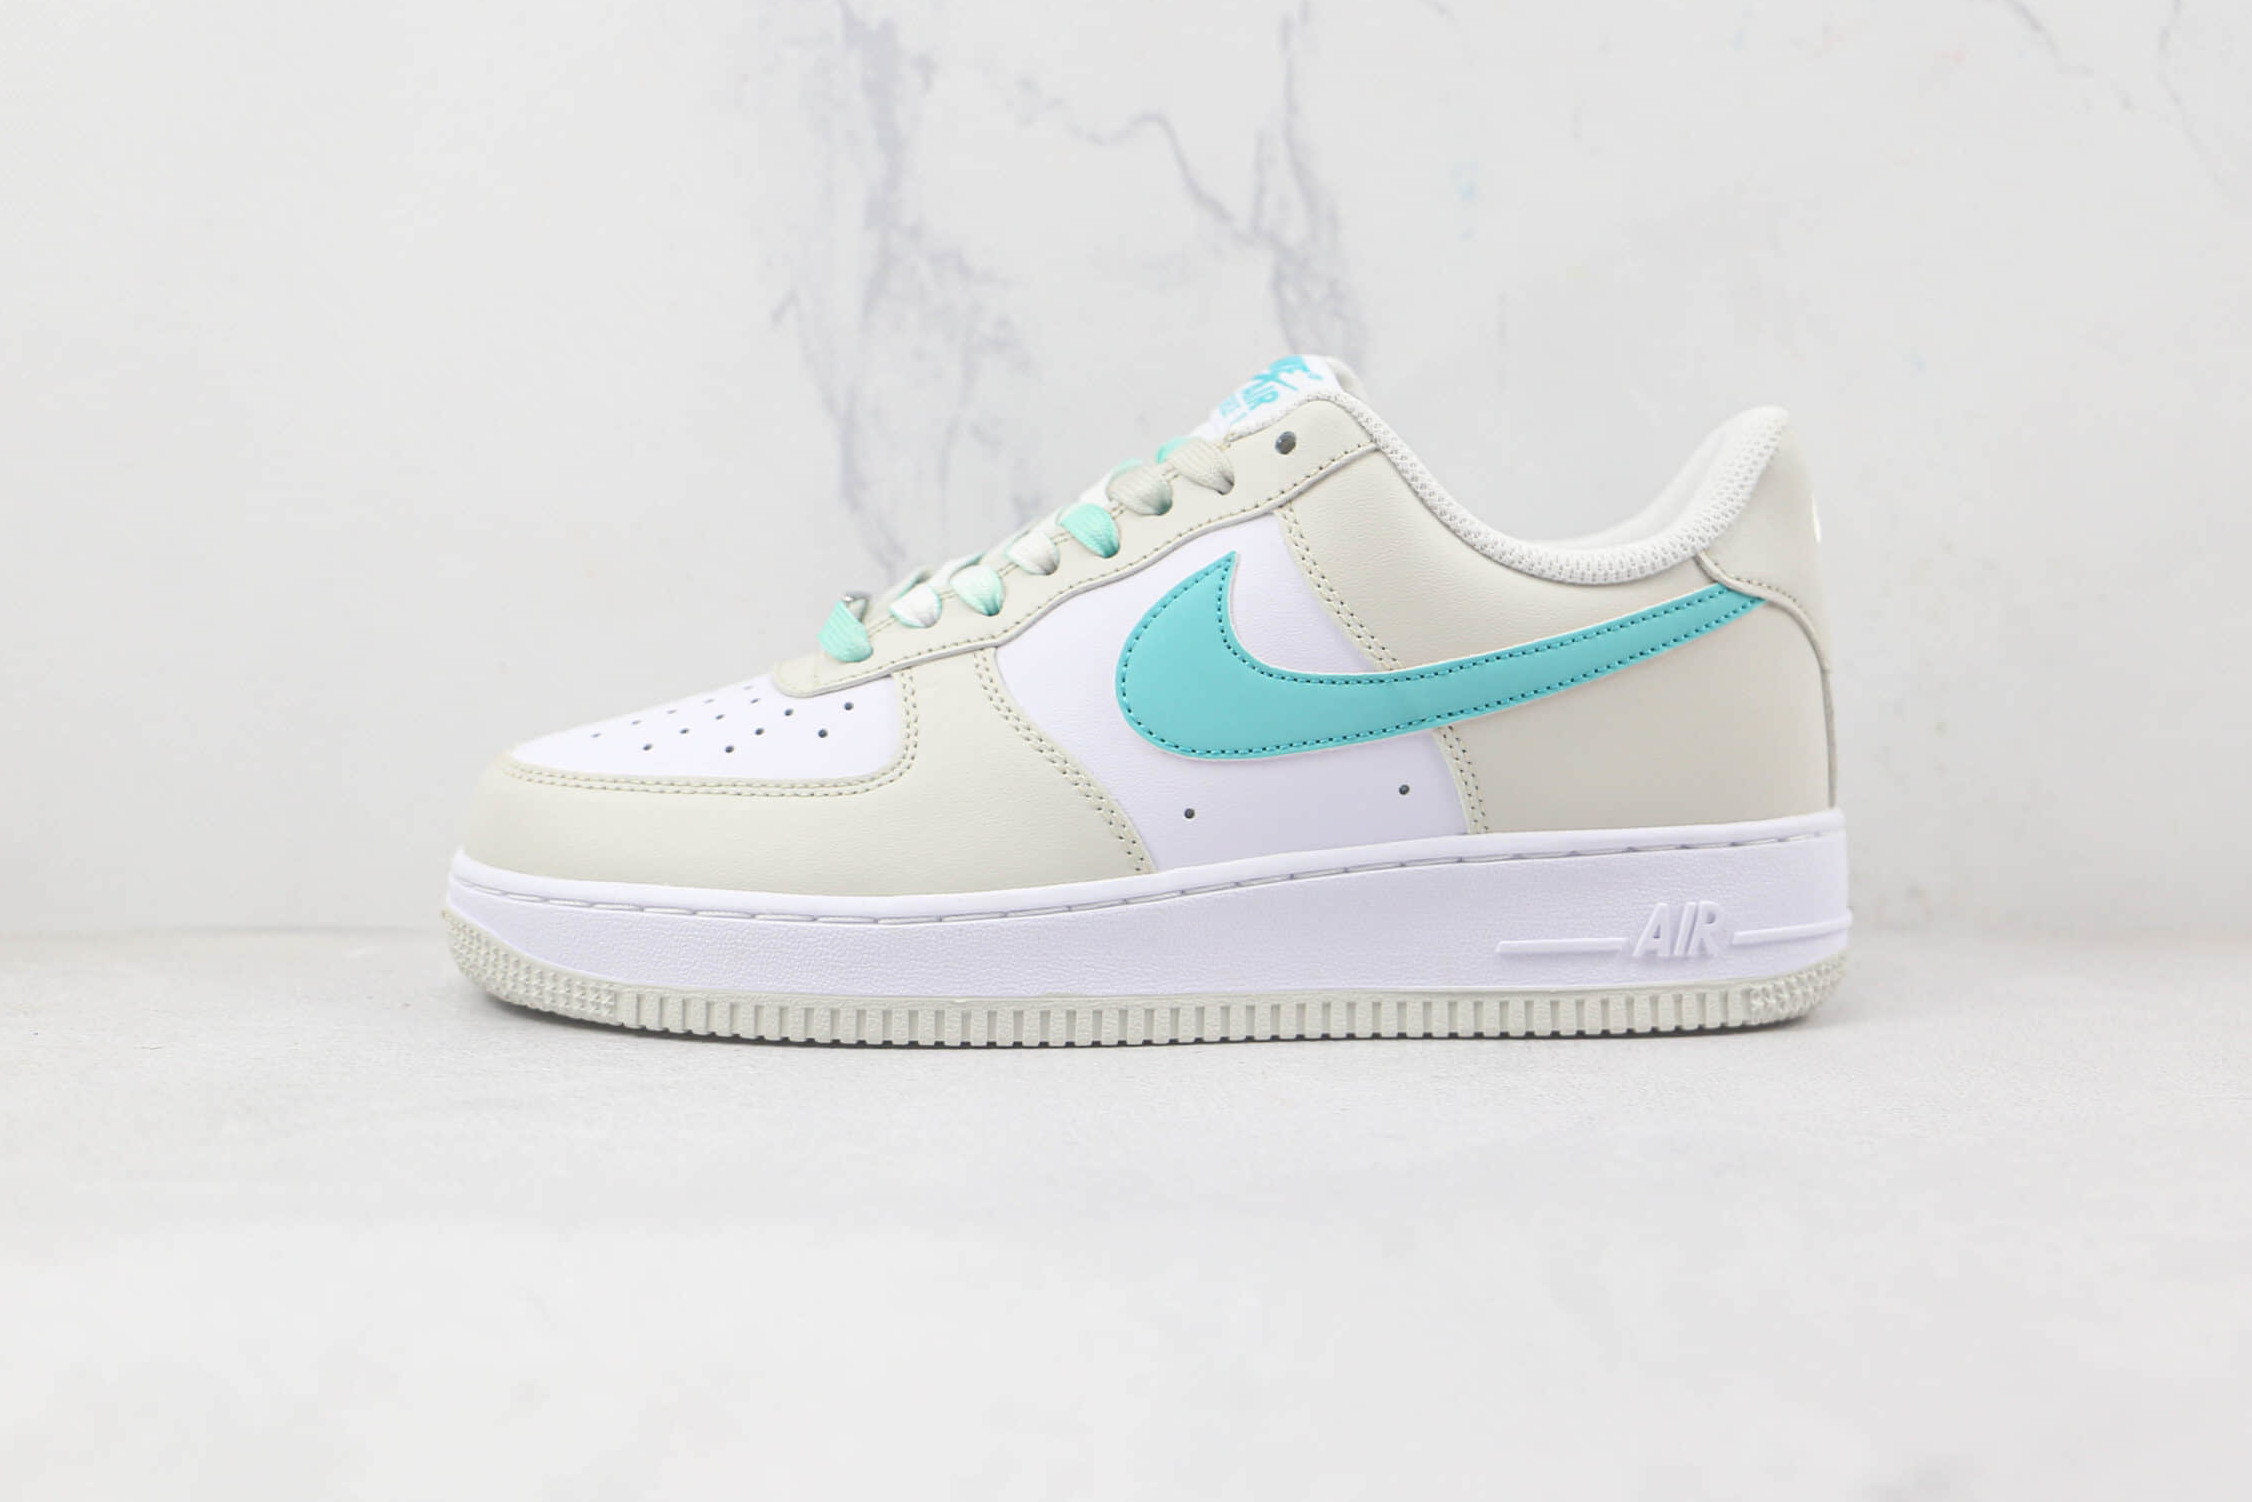 Nike Air Force 1 07 Low White Navy Blue Off-White LZ6699-555 - Stylish and Versatile Sneakers for Men